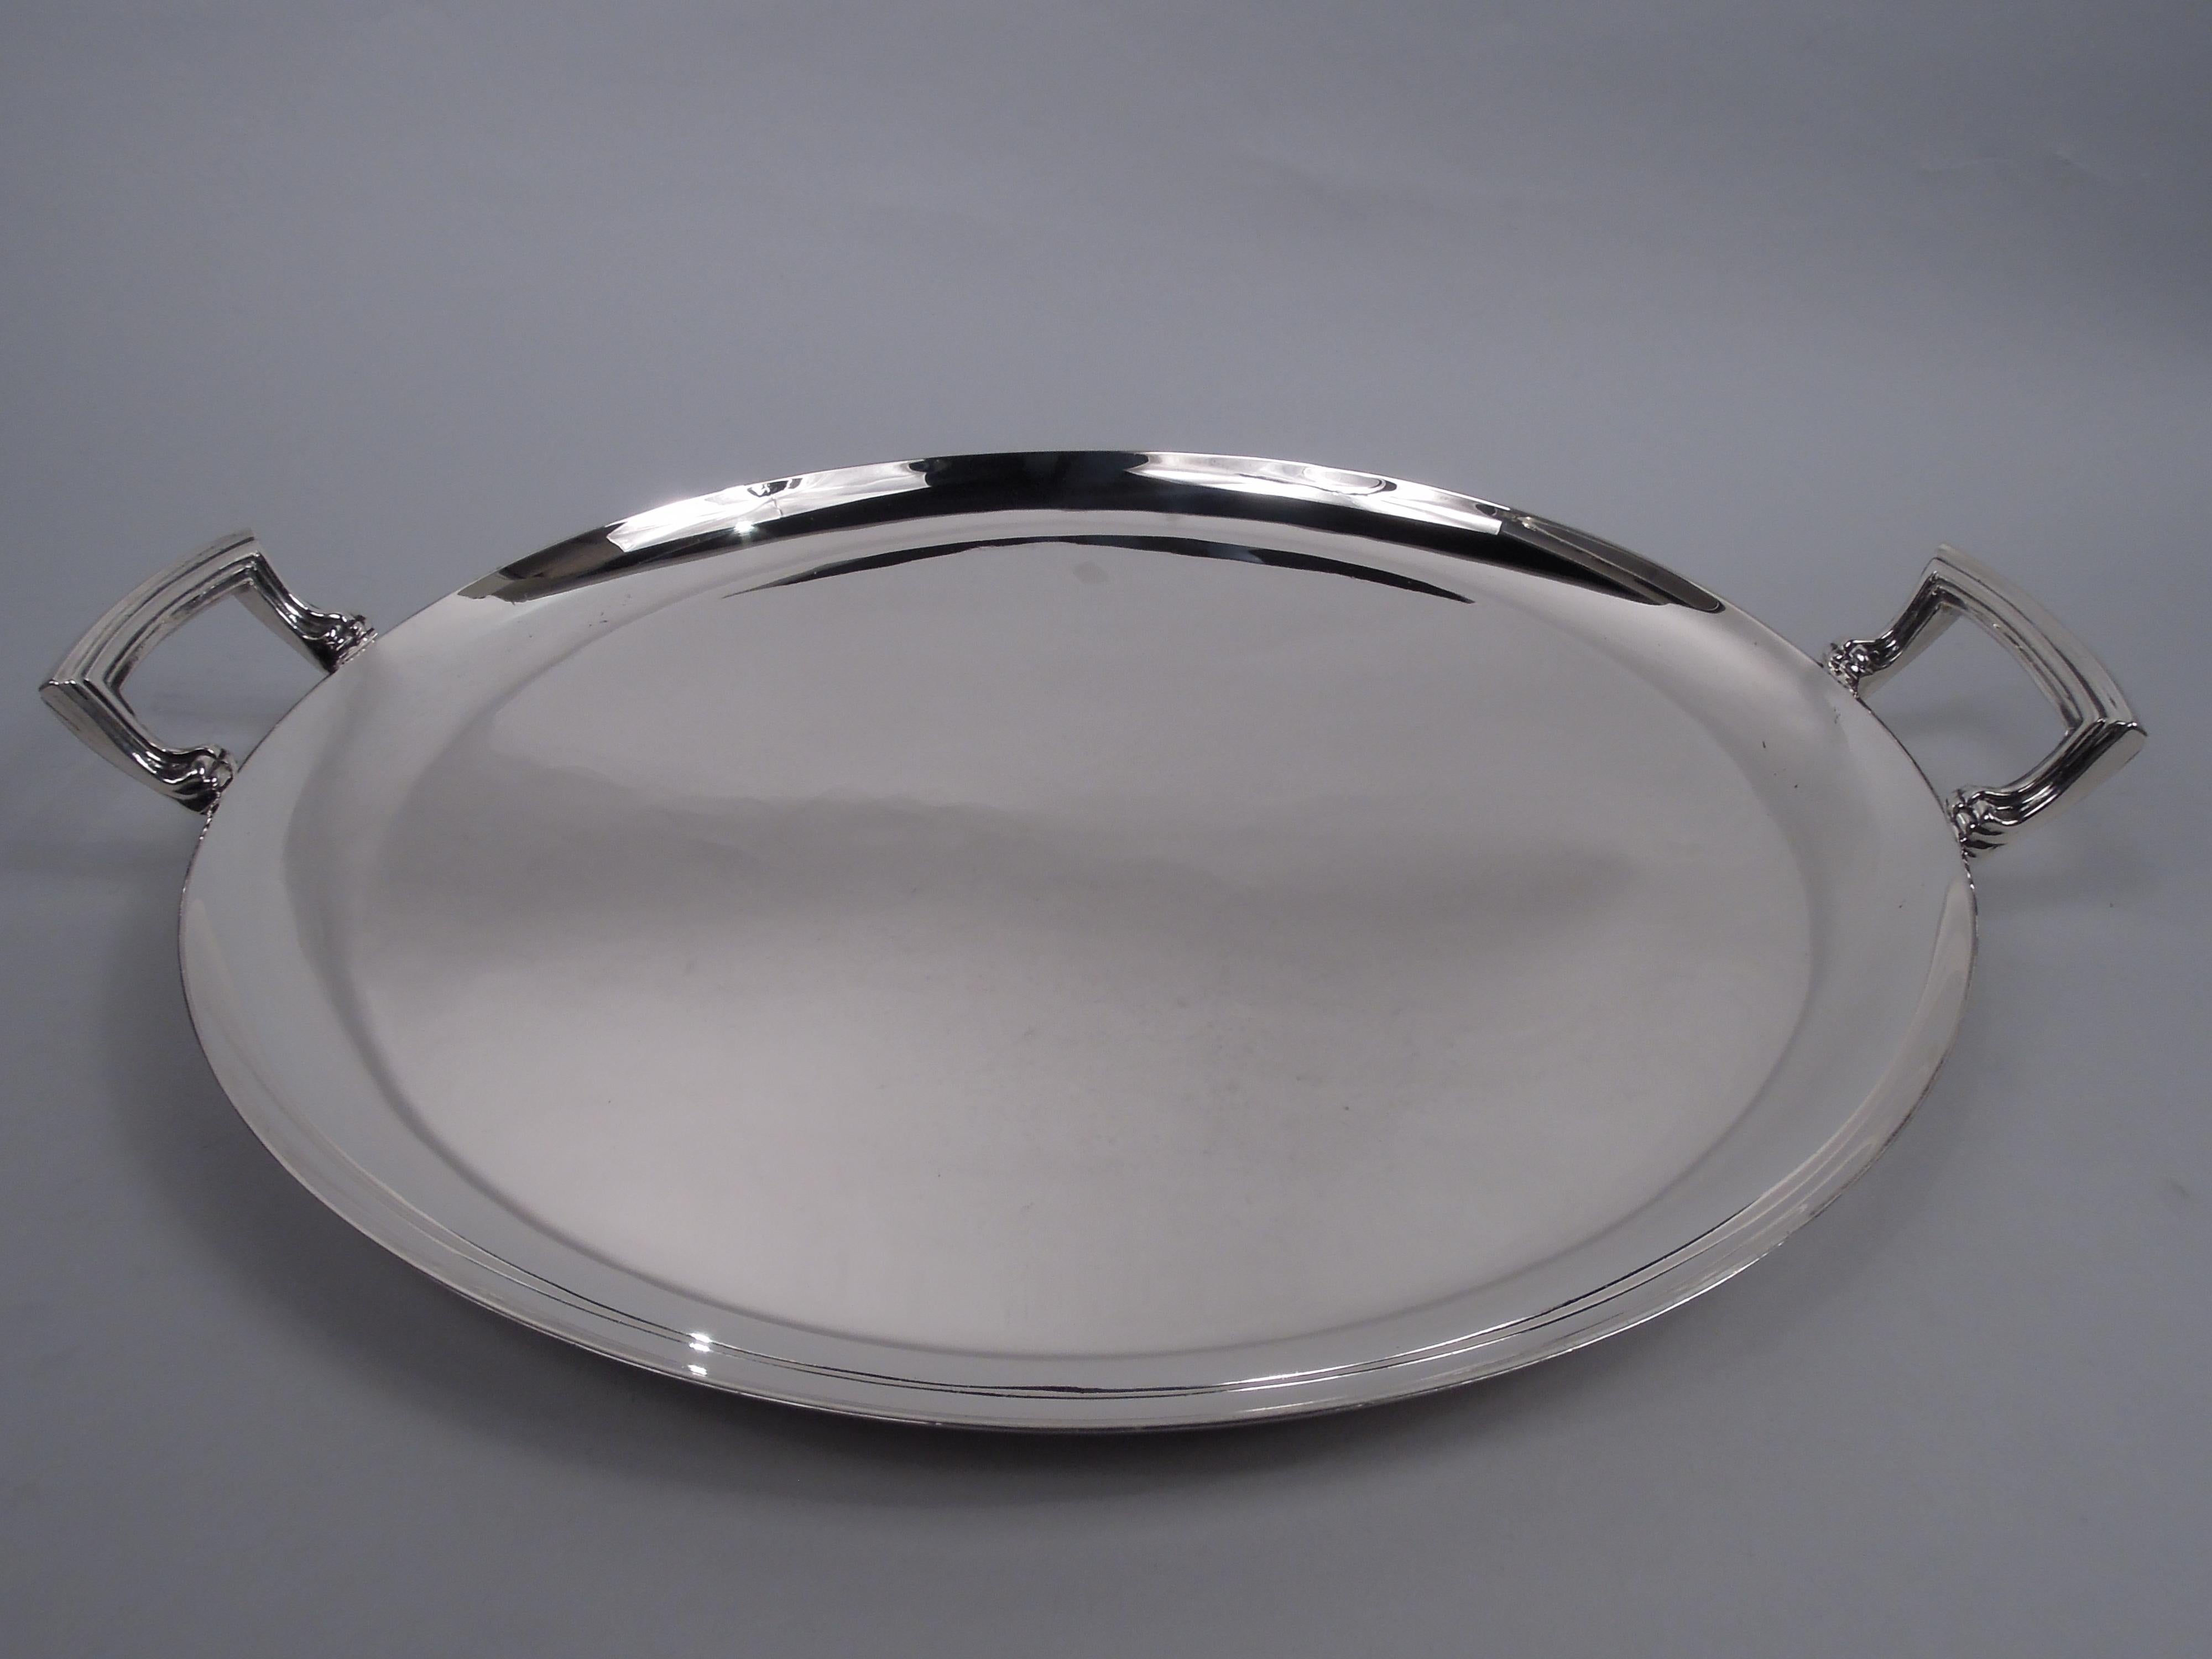 English Art Deco sterling silver serving tray, 1938. Retailed by Harrods in London. Round with curved and tapering sides. Reeded bracket handles mounted vertically to sides. Capacious with nice balance and heft. Fully marked including retailer’s